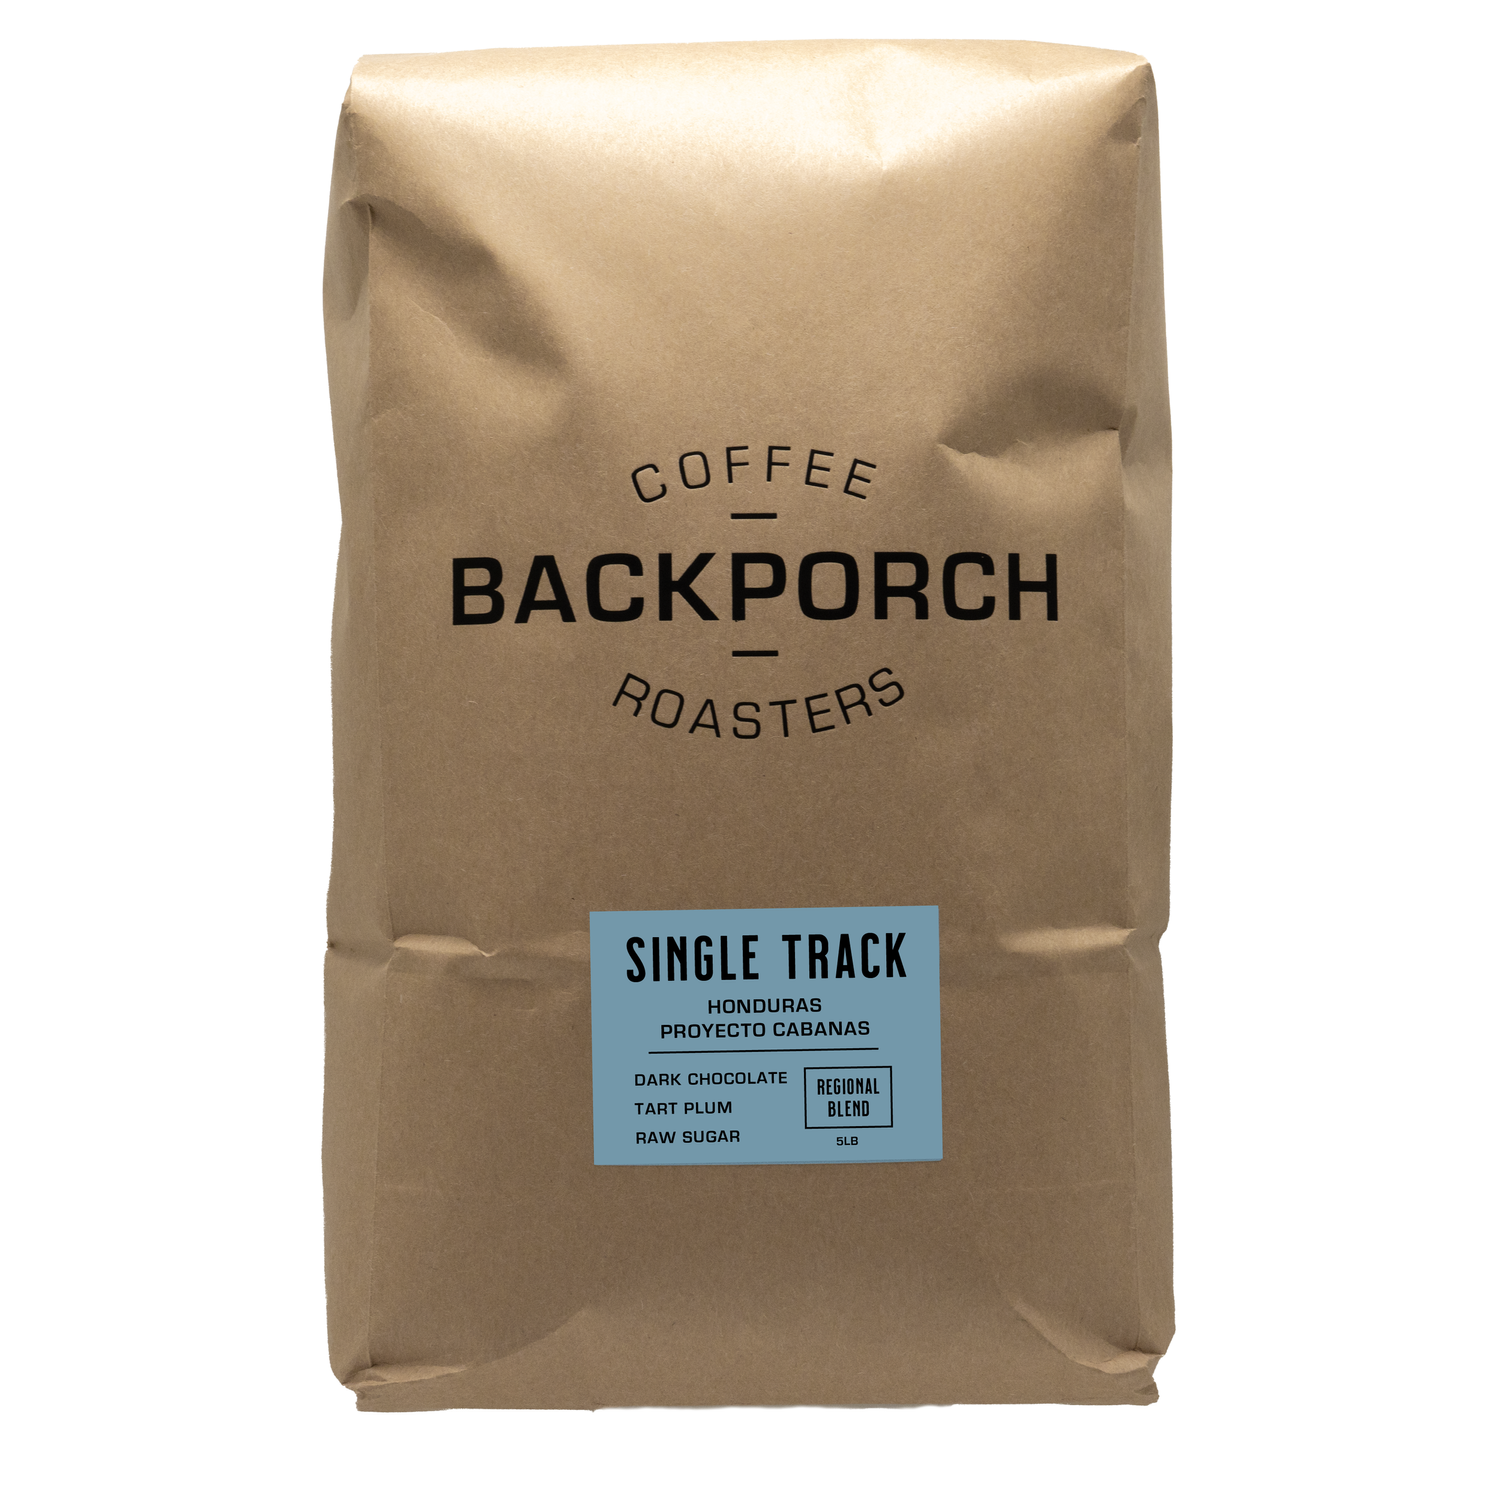 Ratio Six Brewer — Backporch Coffee Roasters